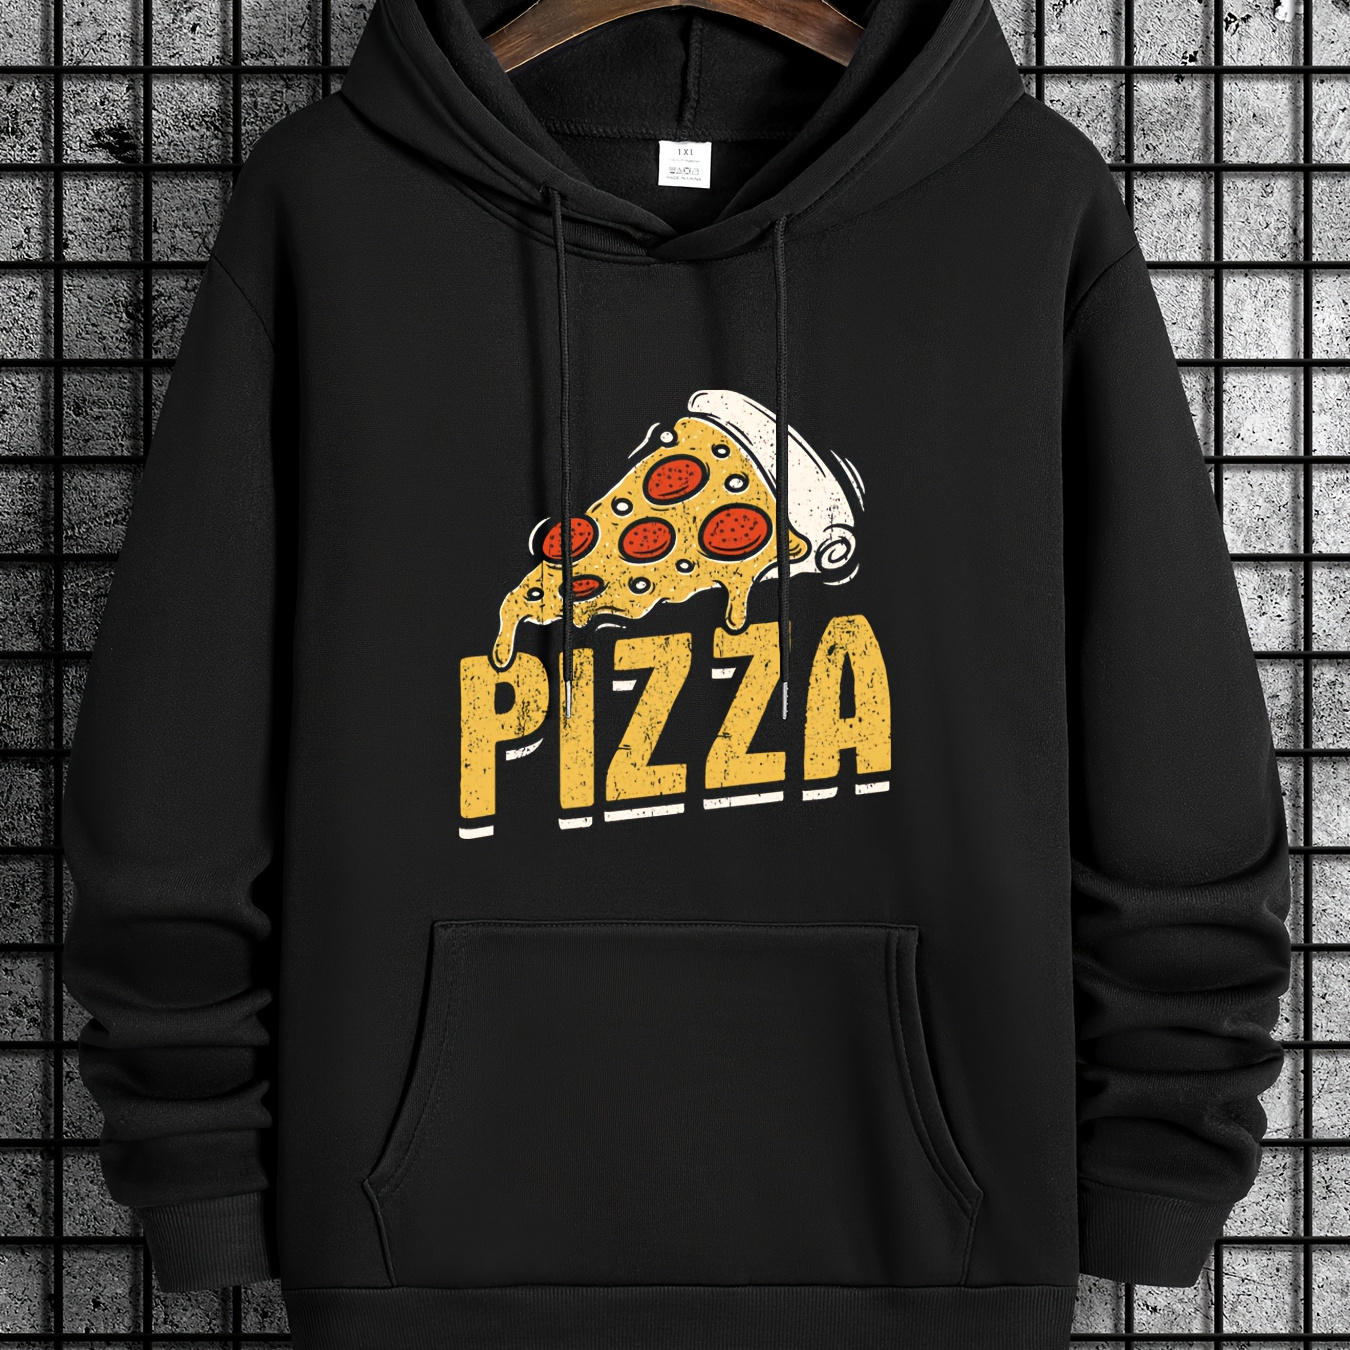 

Pizza Print Plus Size Hoodies For Men, Graphic Hoodie With Kangaroo Pocket, Comfy Loose Trendy Hooded Pullover, Mens Clothing For Autumn Winter